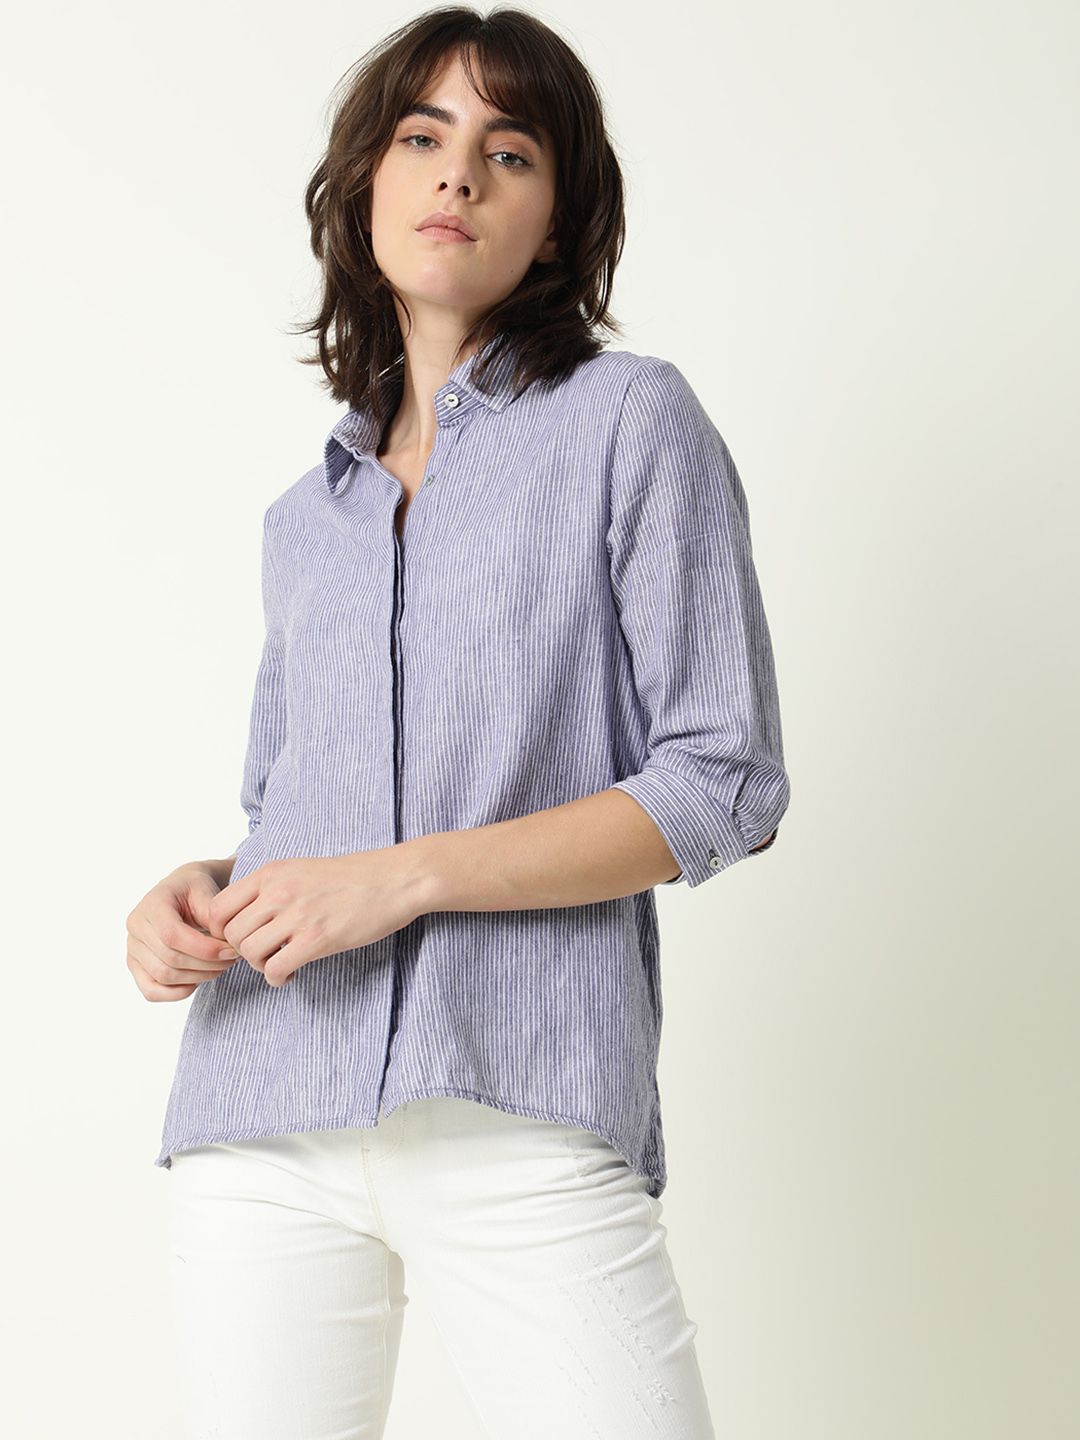 RAREISM Blue Shirt Style Top Price in India